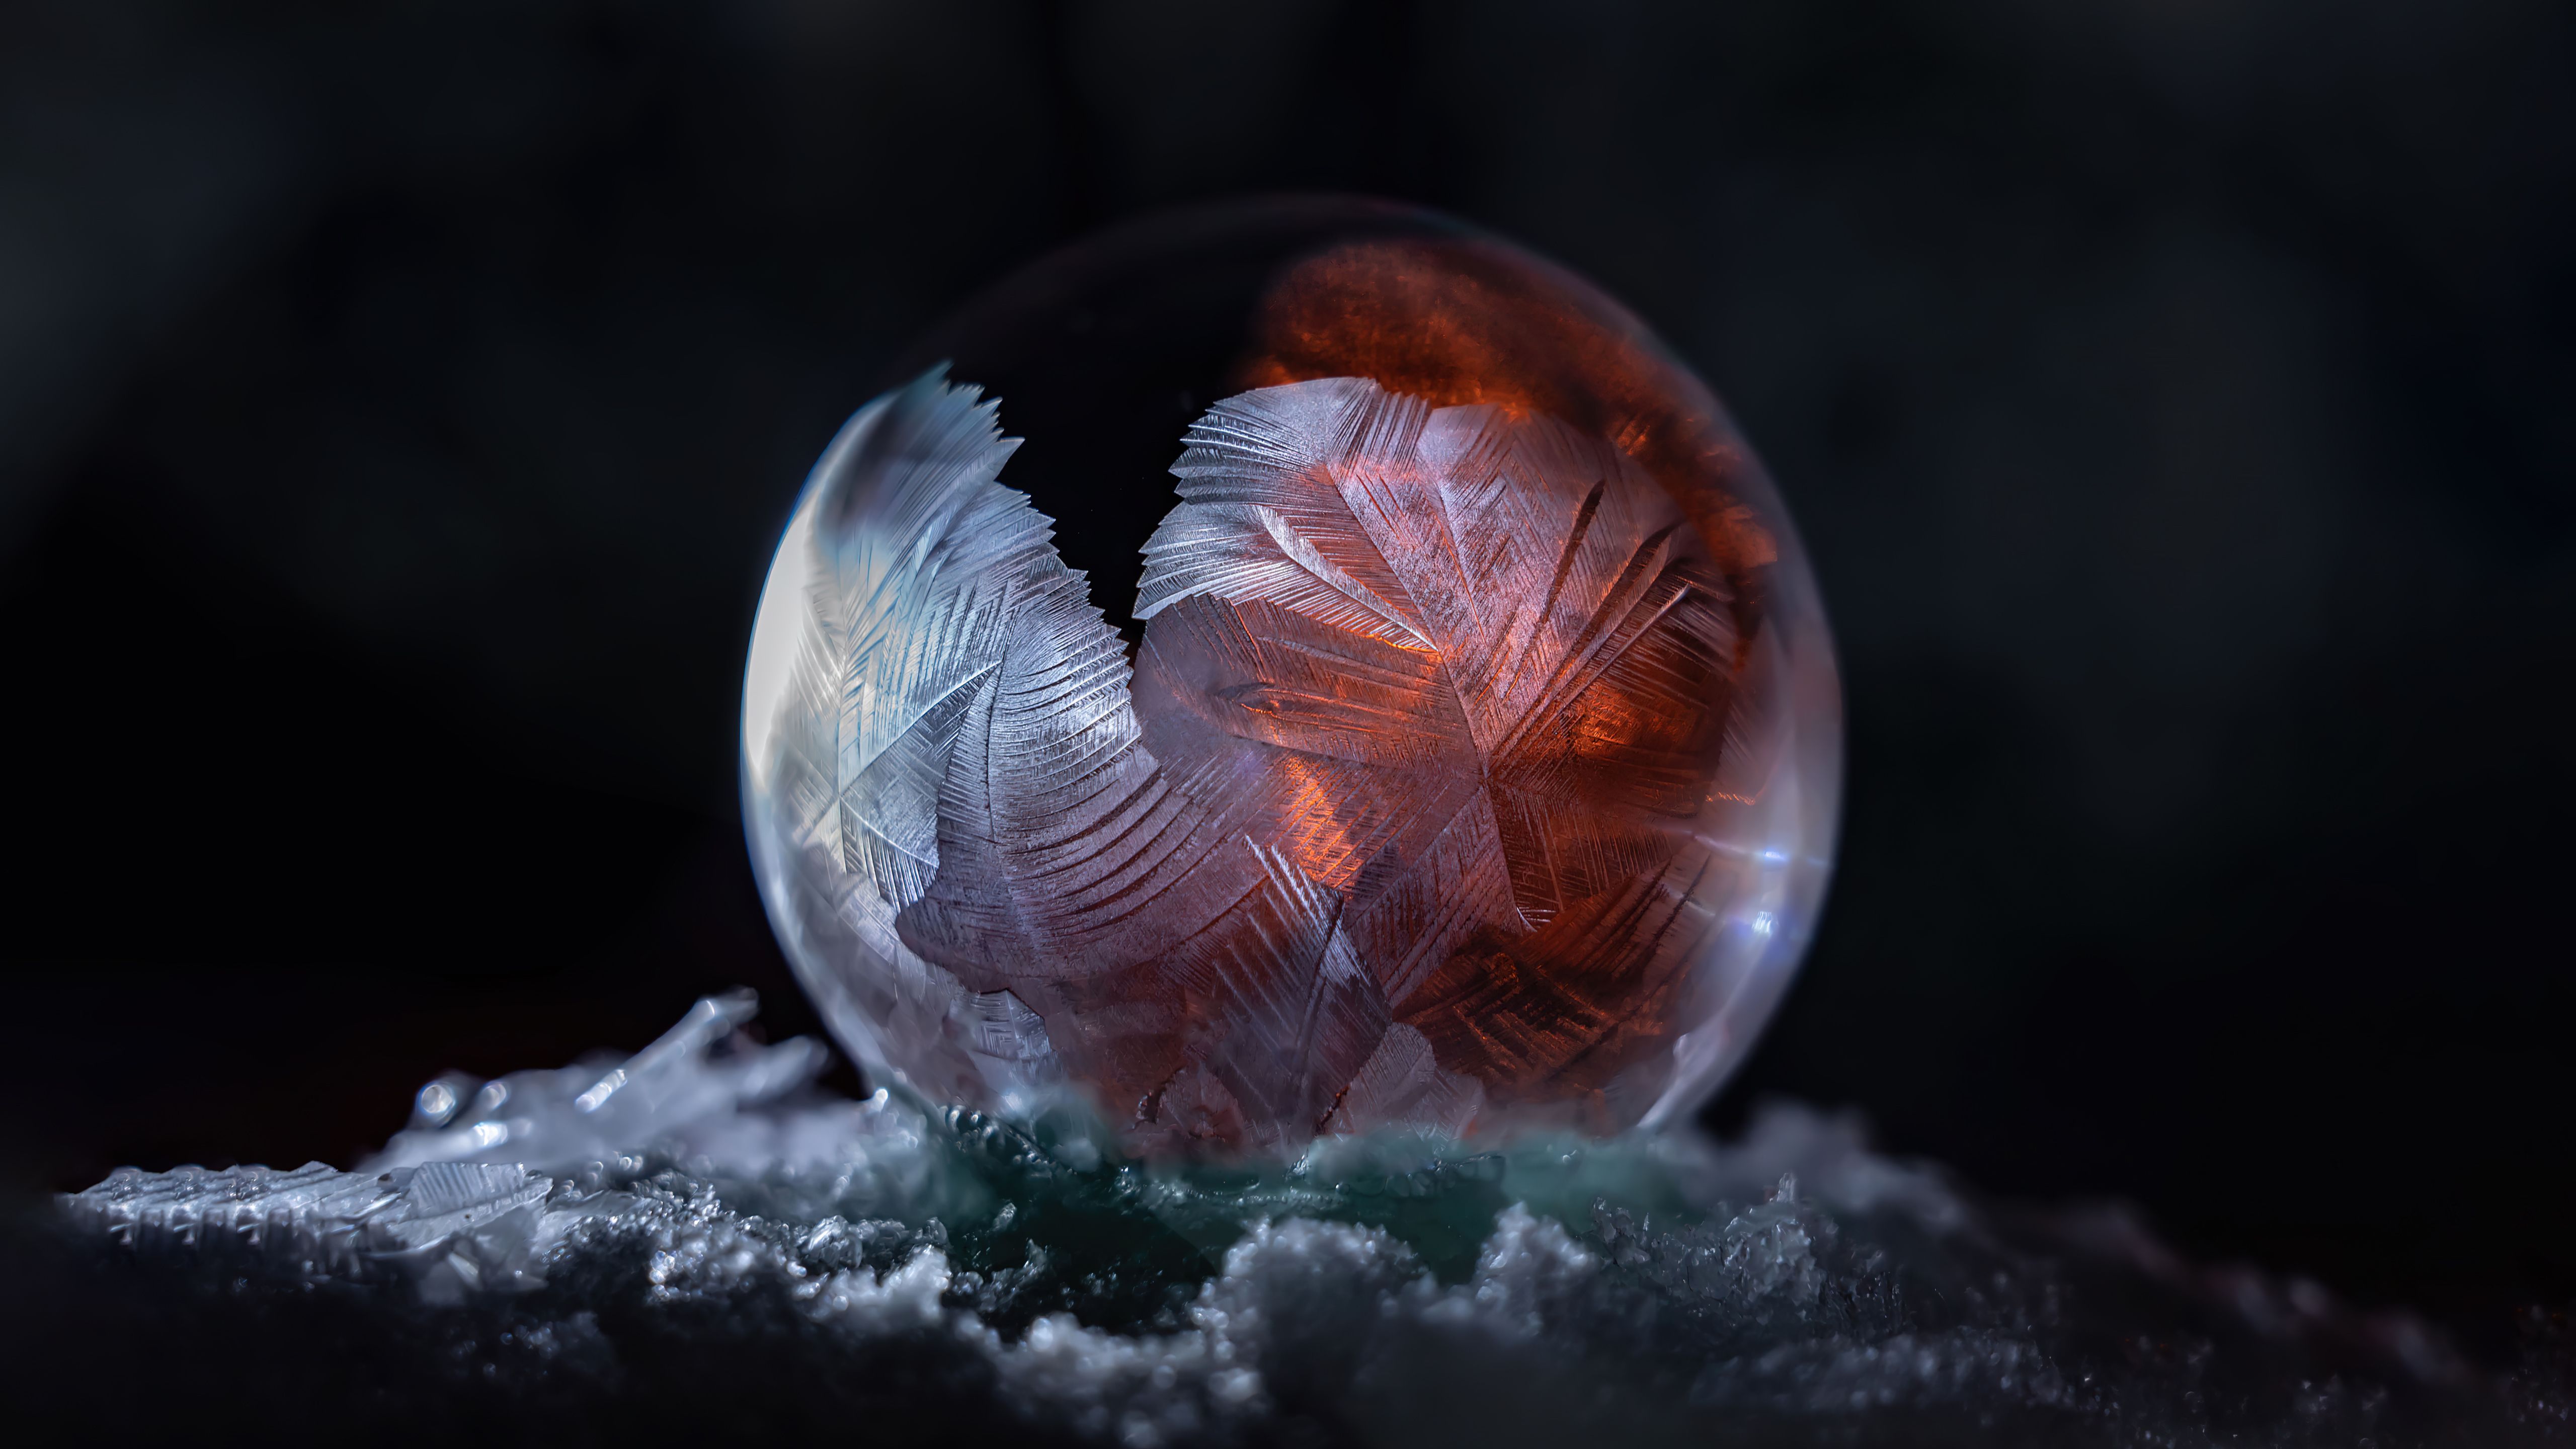 A frozen soap bubble on a bed of snow. - Macro